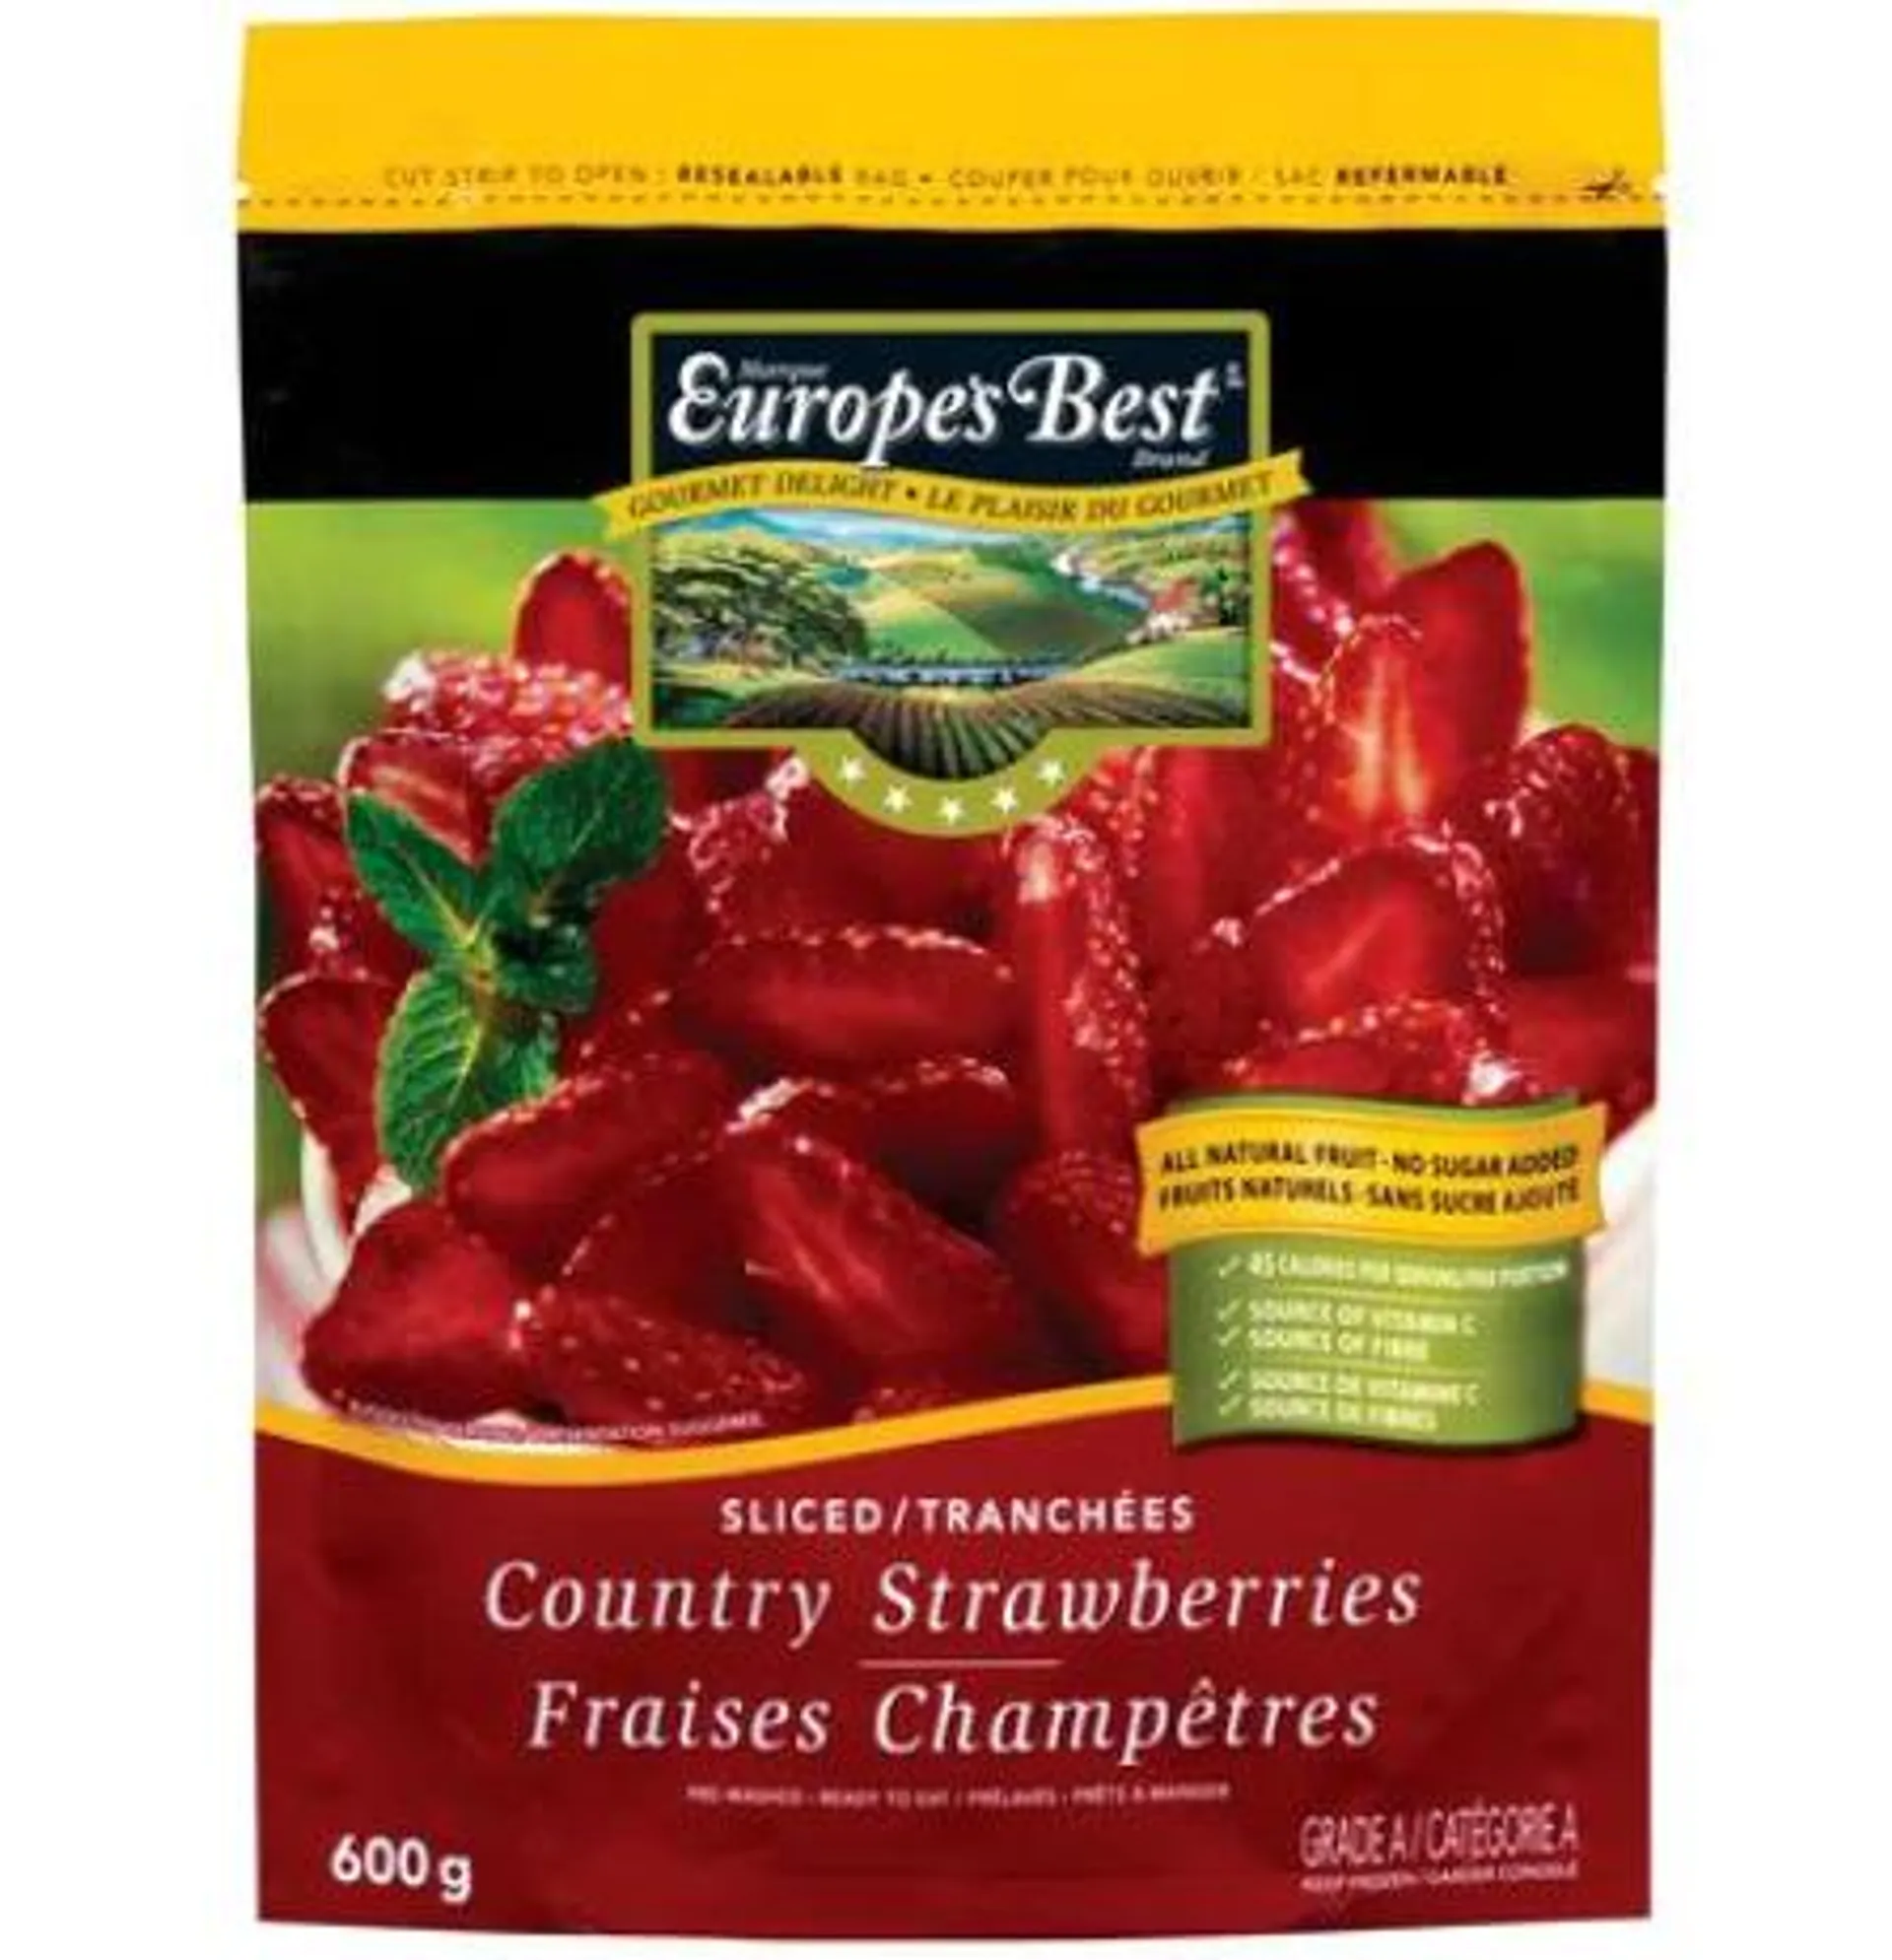 Europe'sBest country strawberry - 600g